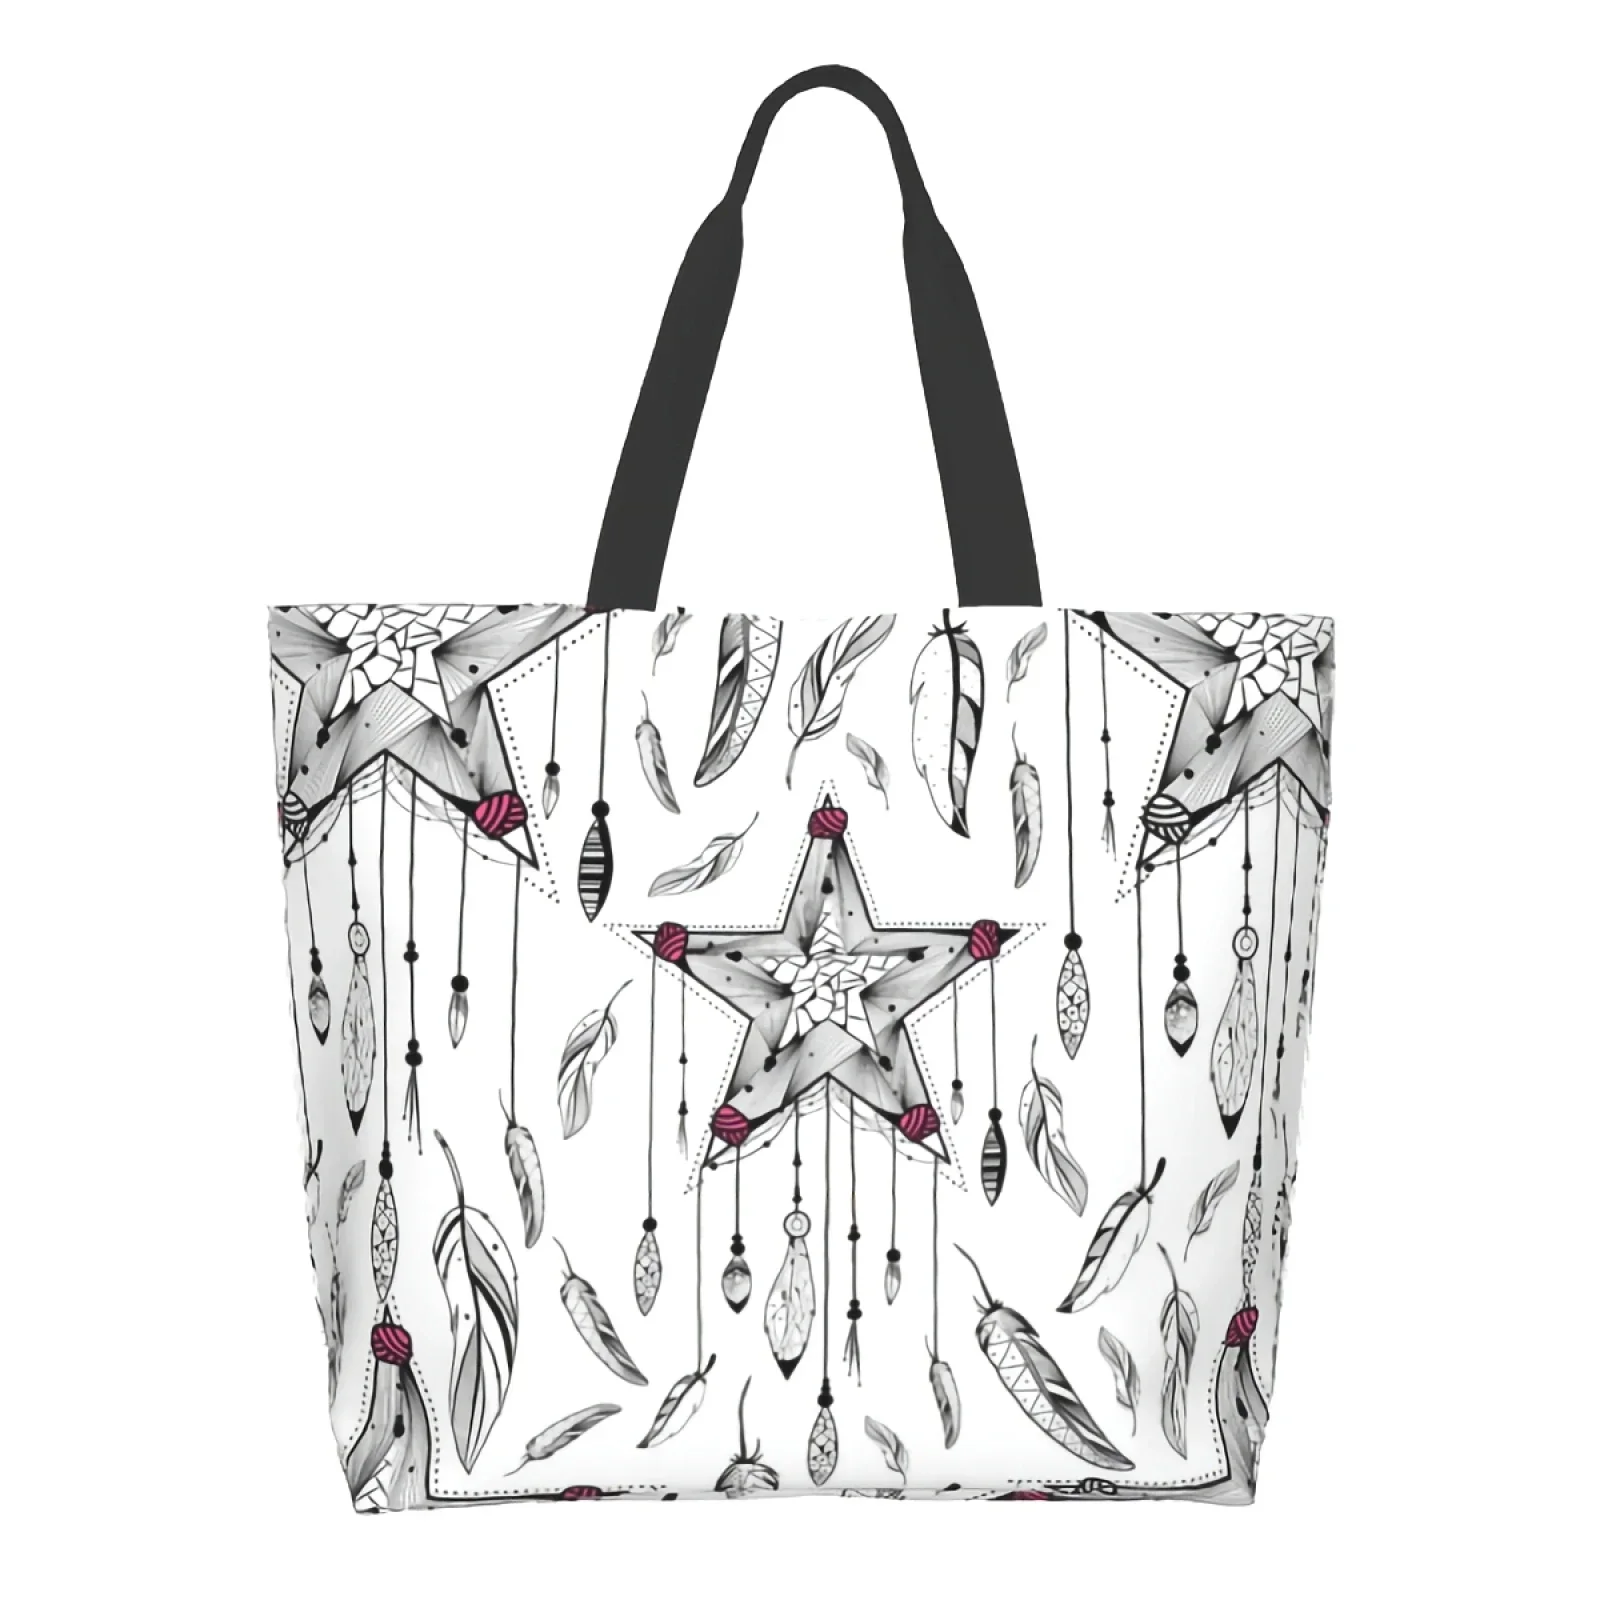 

Dream Catcher Extra Large Grocery Bag Star and Feathers Boho Style Reusable Tote Bag Shopping Travel Storage Tote